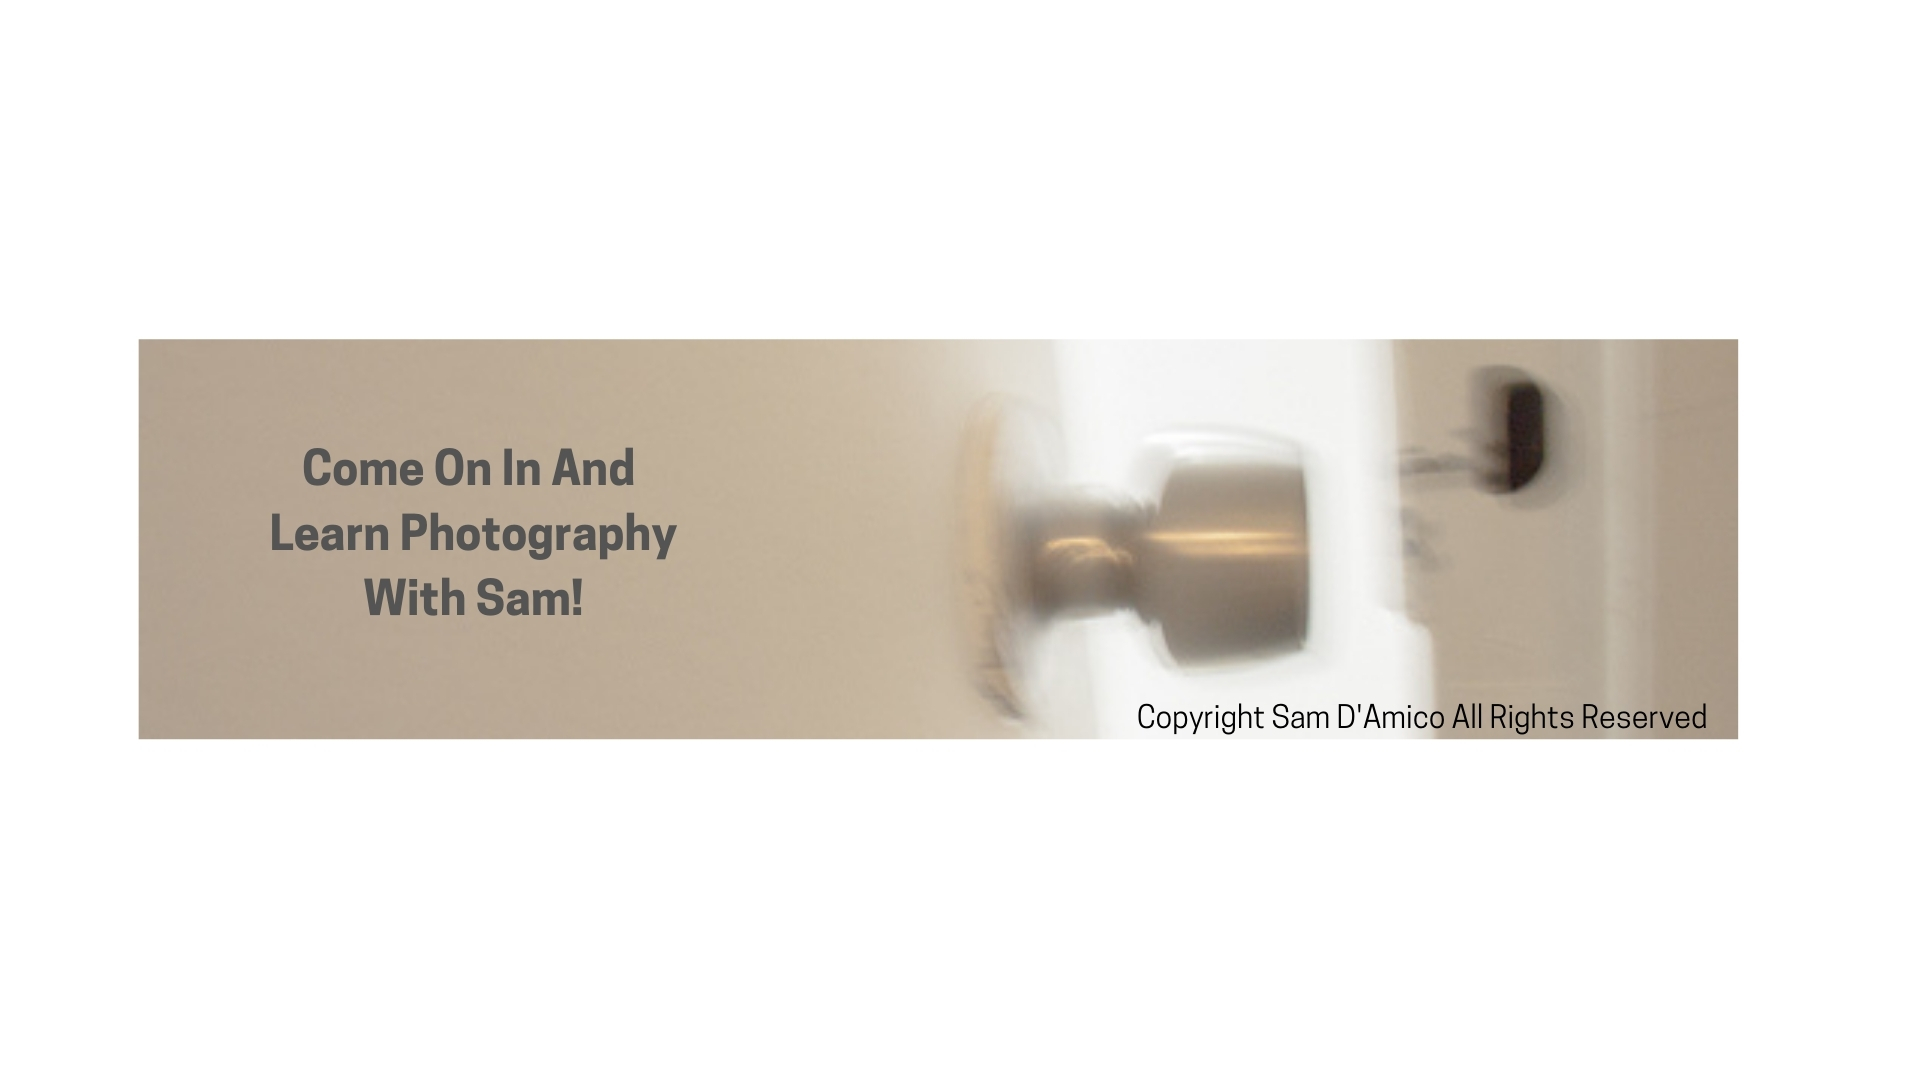 Study And Practice Photography online with Sam